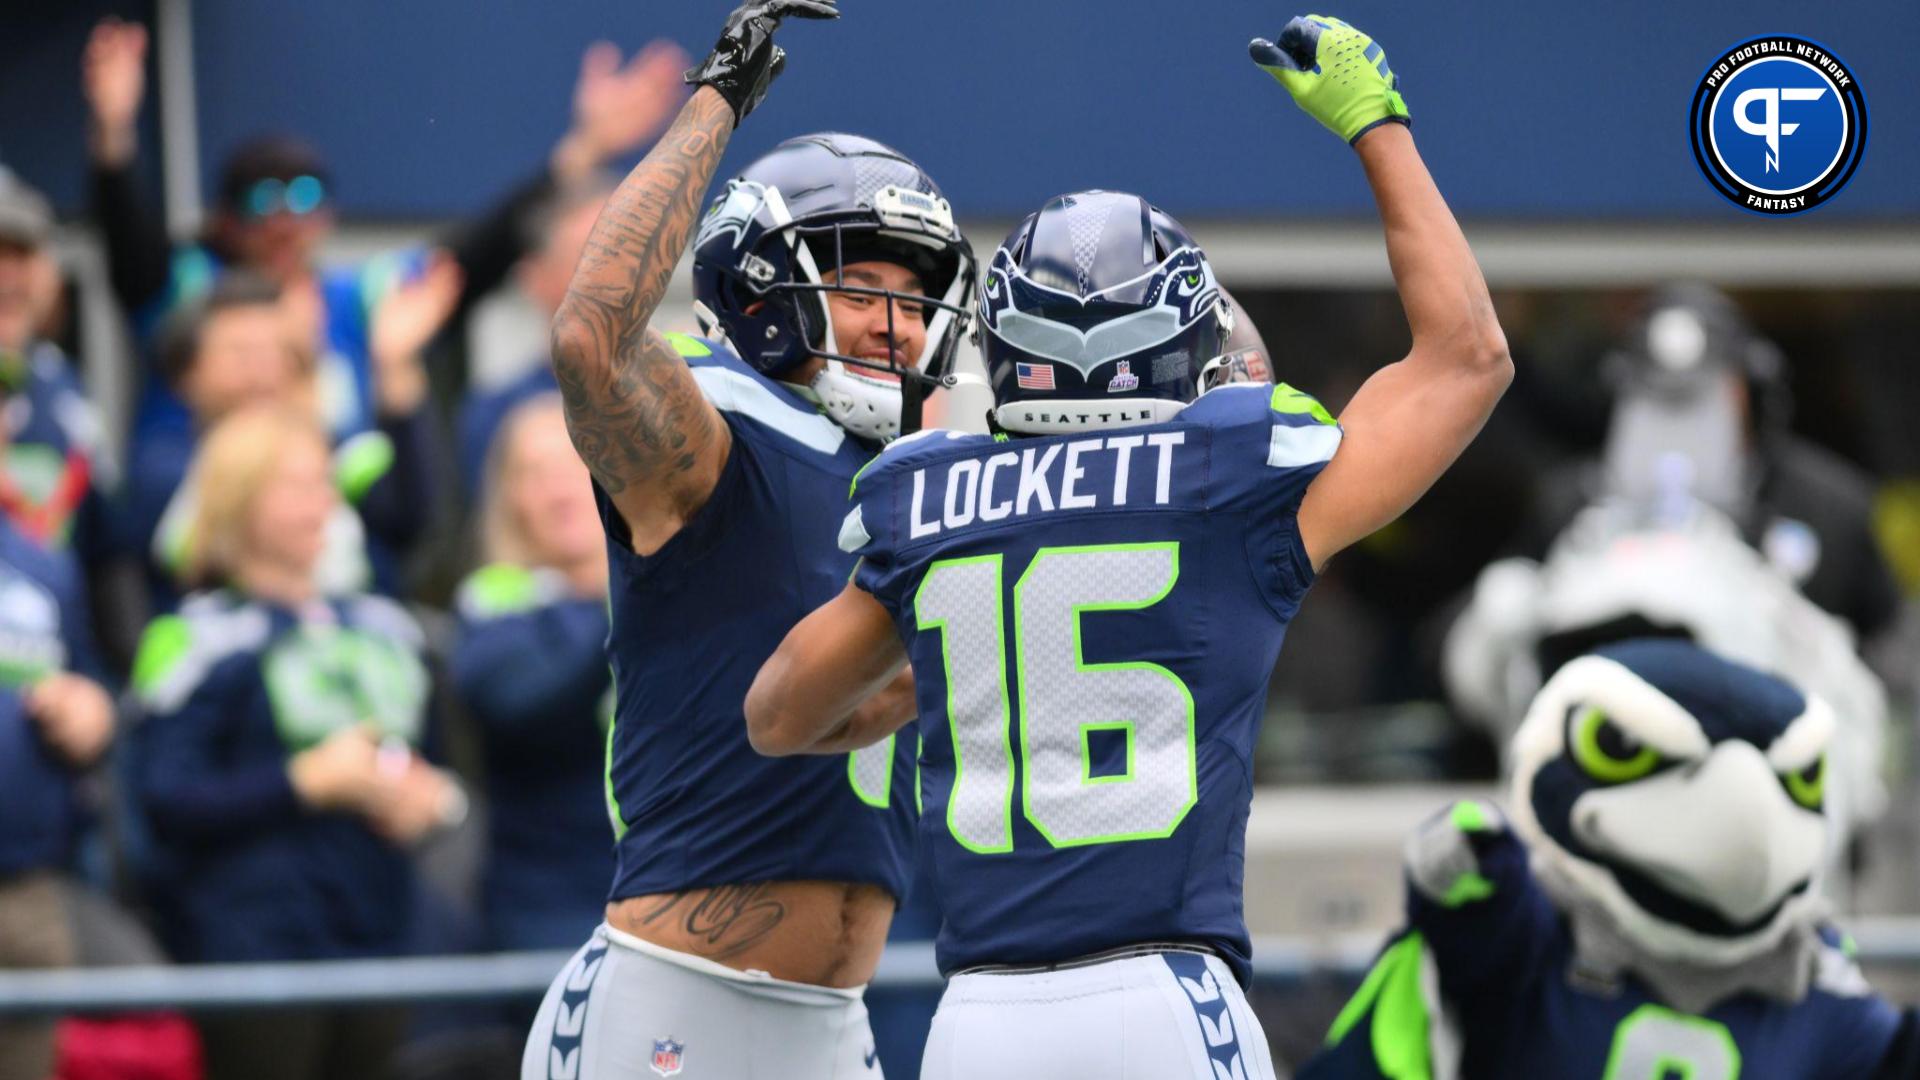 Seattle Seahawks wide receiver Jaxon Smith-Njigba (11) and Seattle Seahawks wide receiver Tyler Lockett (16) celebrate after Jaxon Smith-Njigba scored a touchdown against the Arizona Cardinals during the first half at Lumen Field.